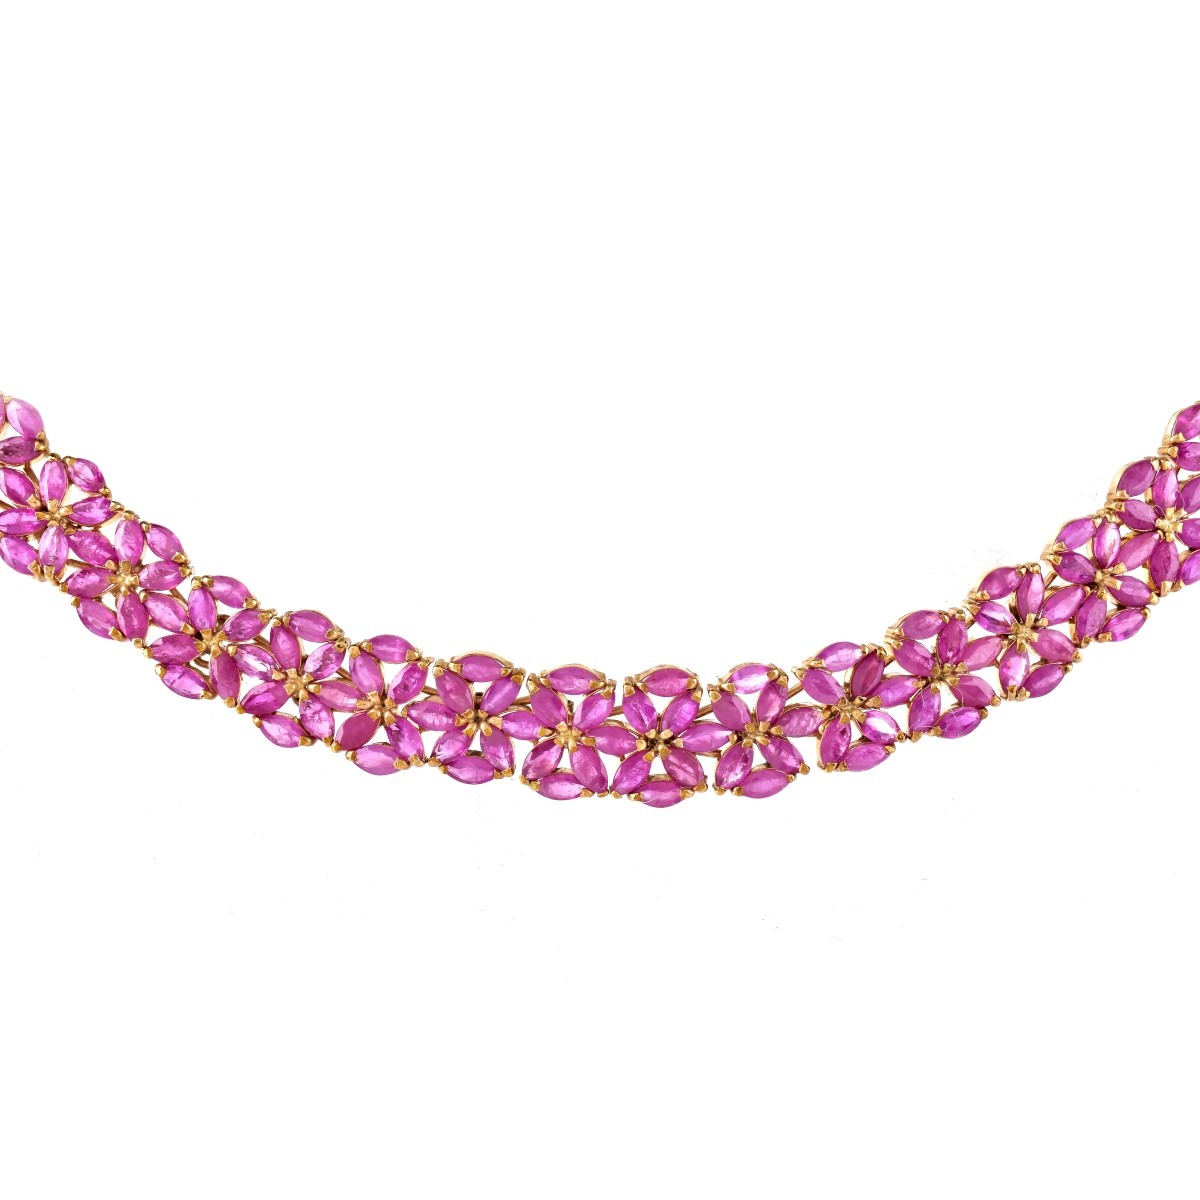 Vintage Ruby and 14K Gold Choker Necklace